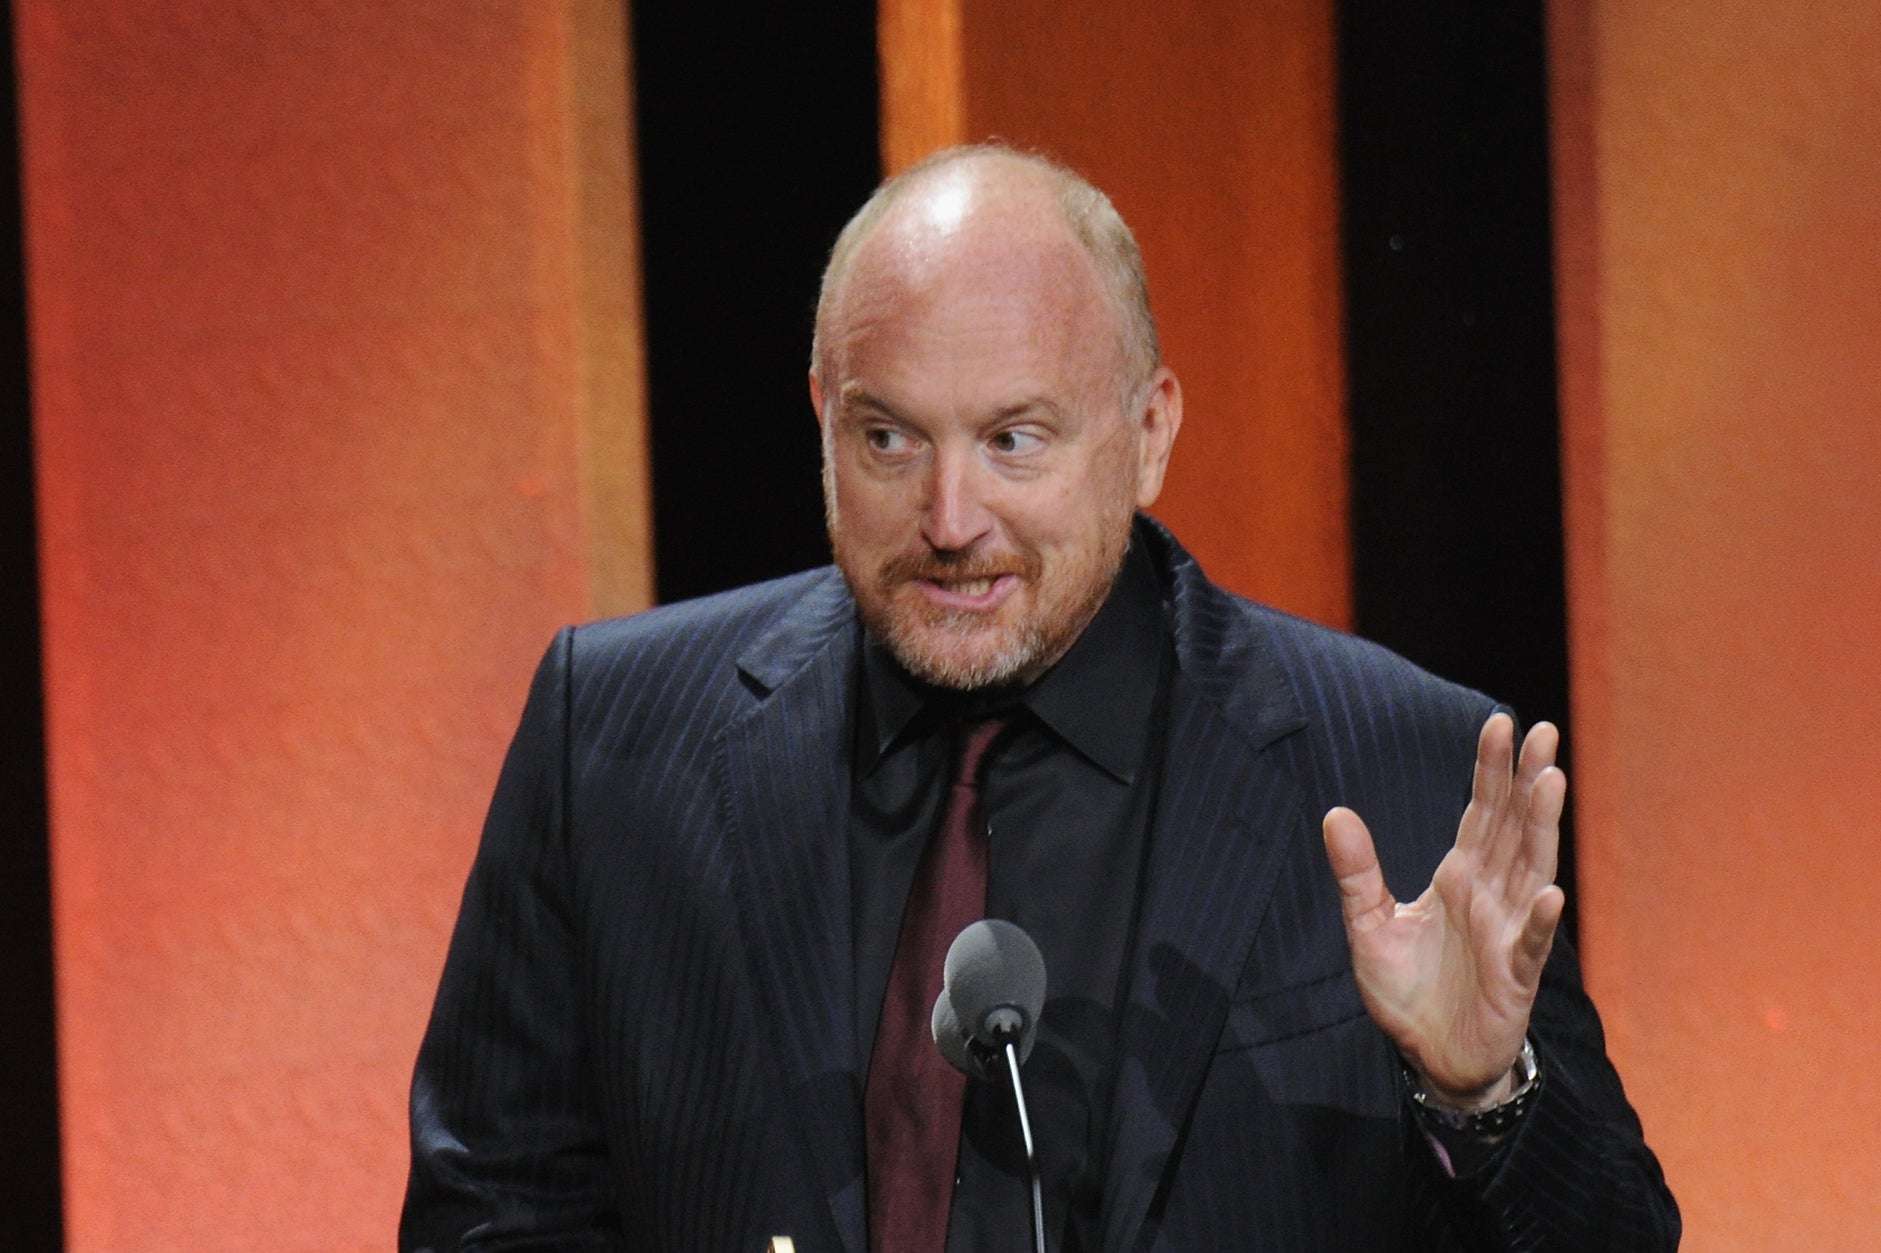 Louis CK admitted to allegations of sexual misconduct in 2017